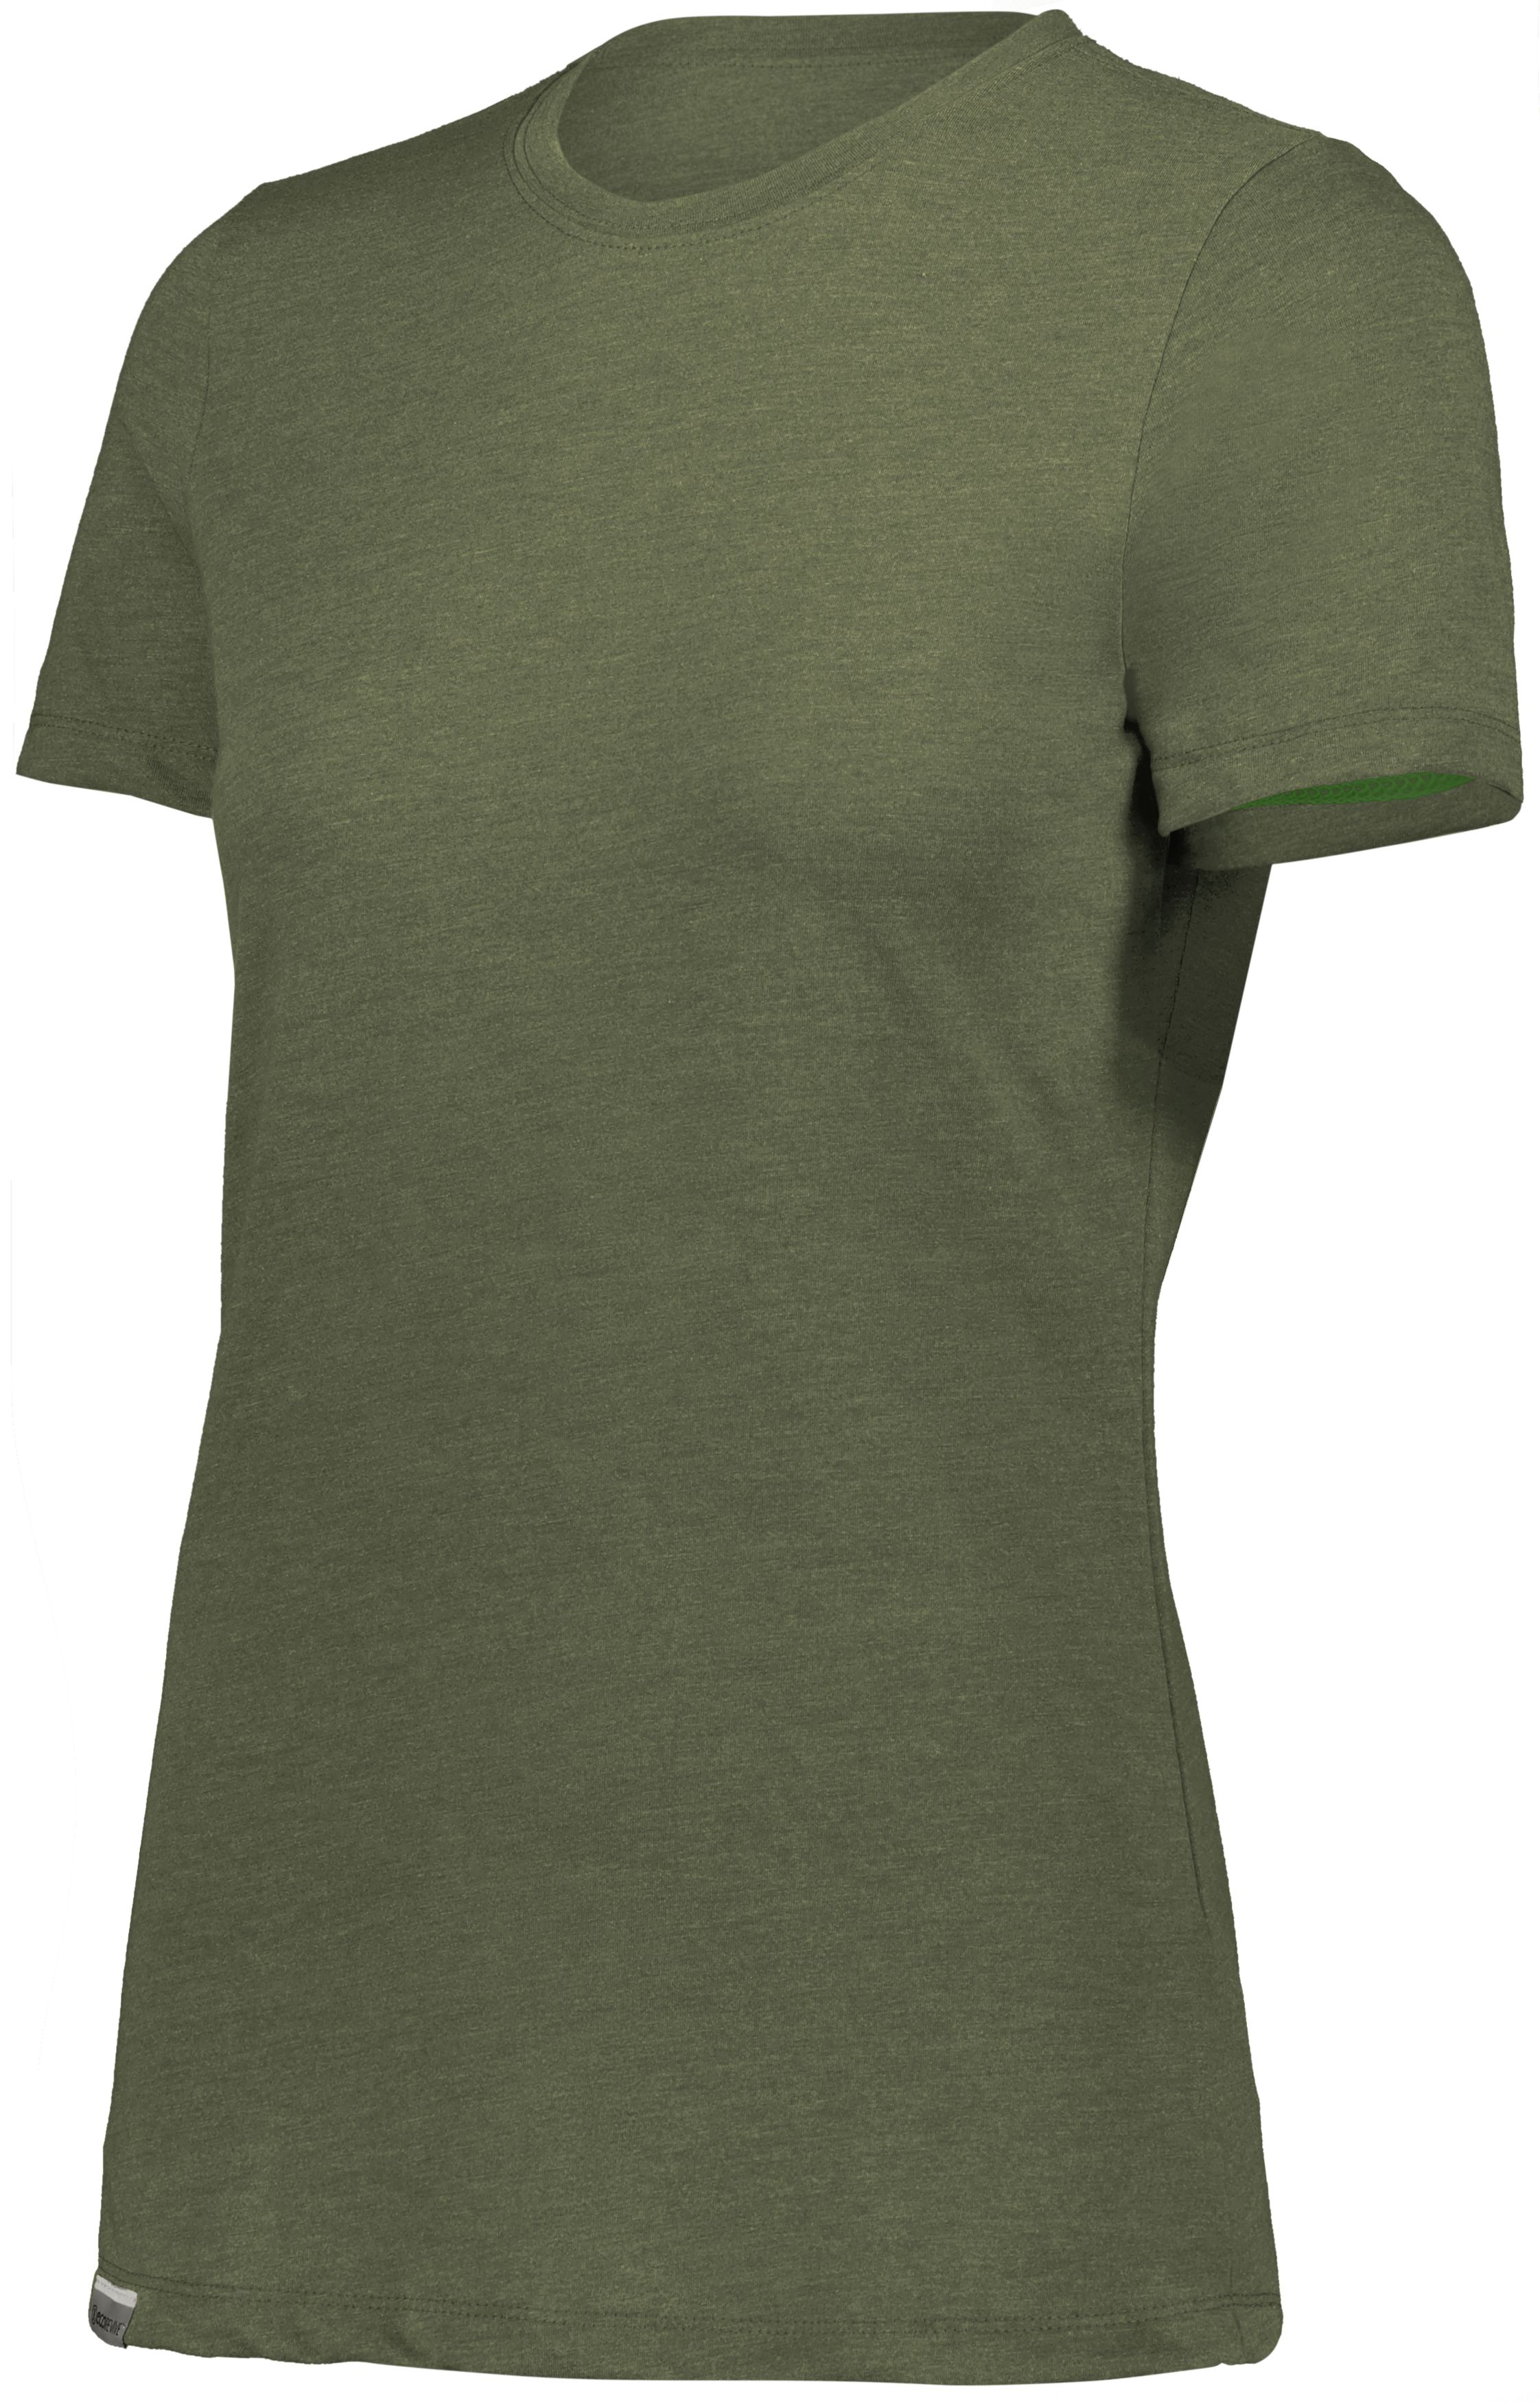 click to view Olive Heather